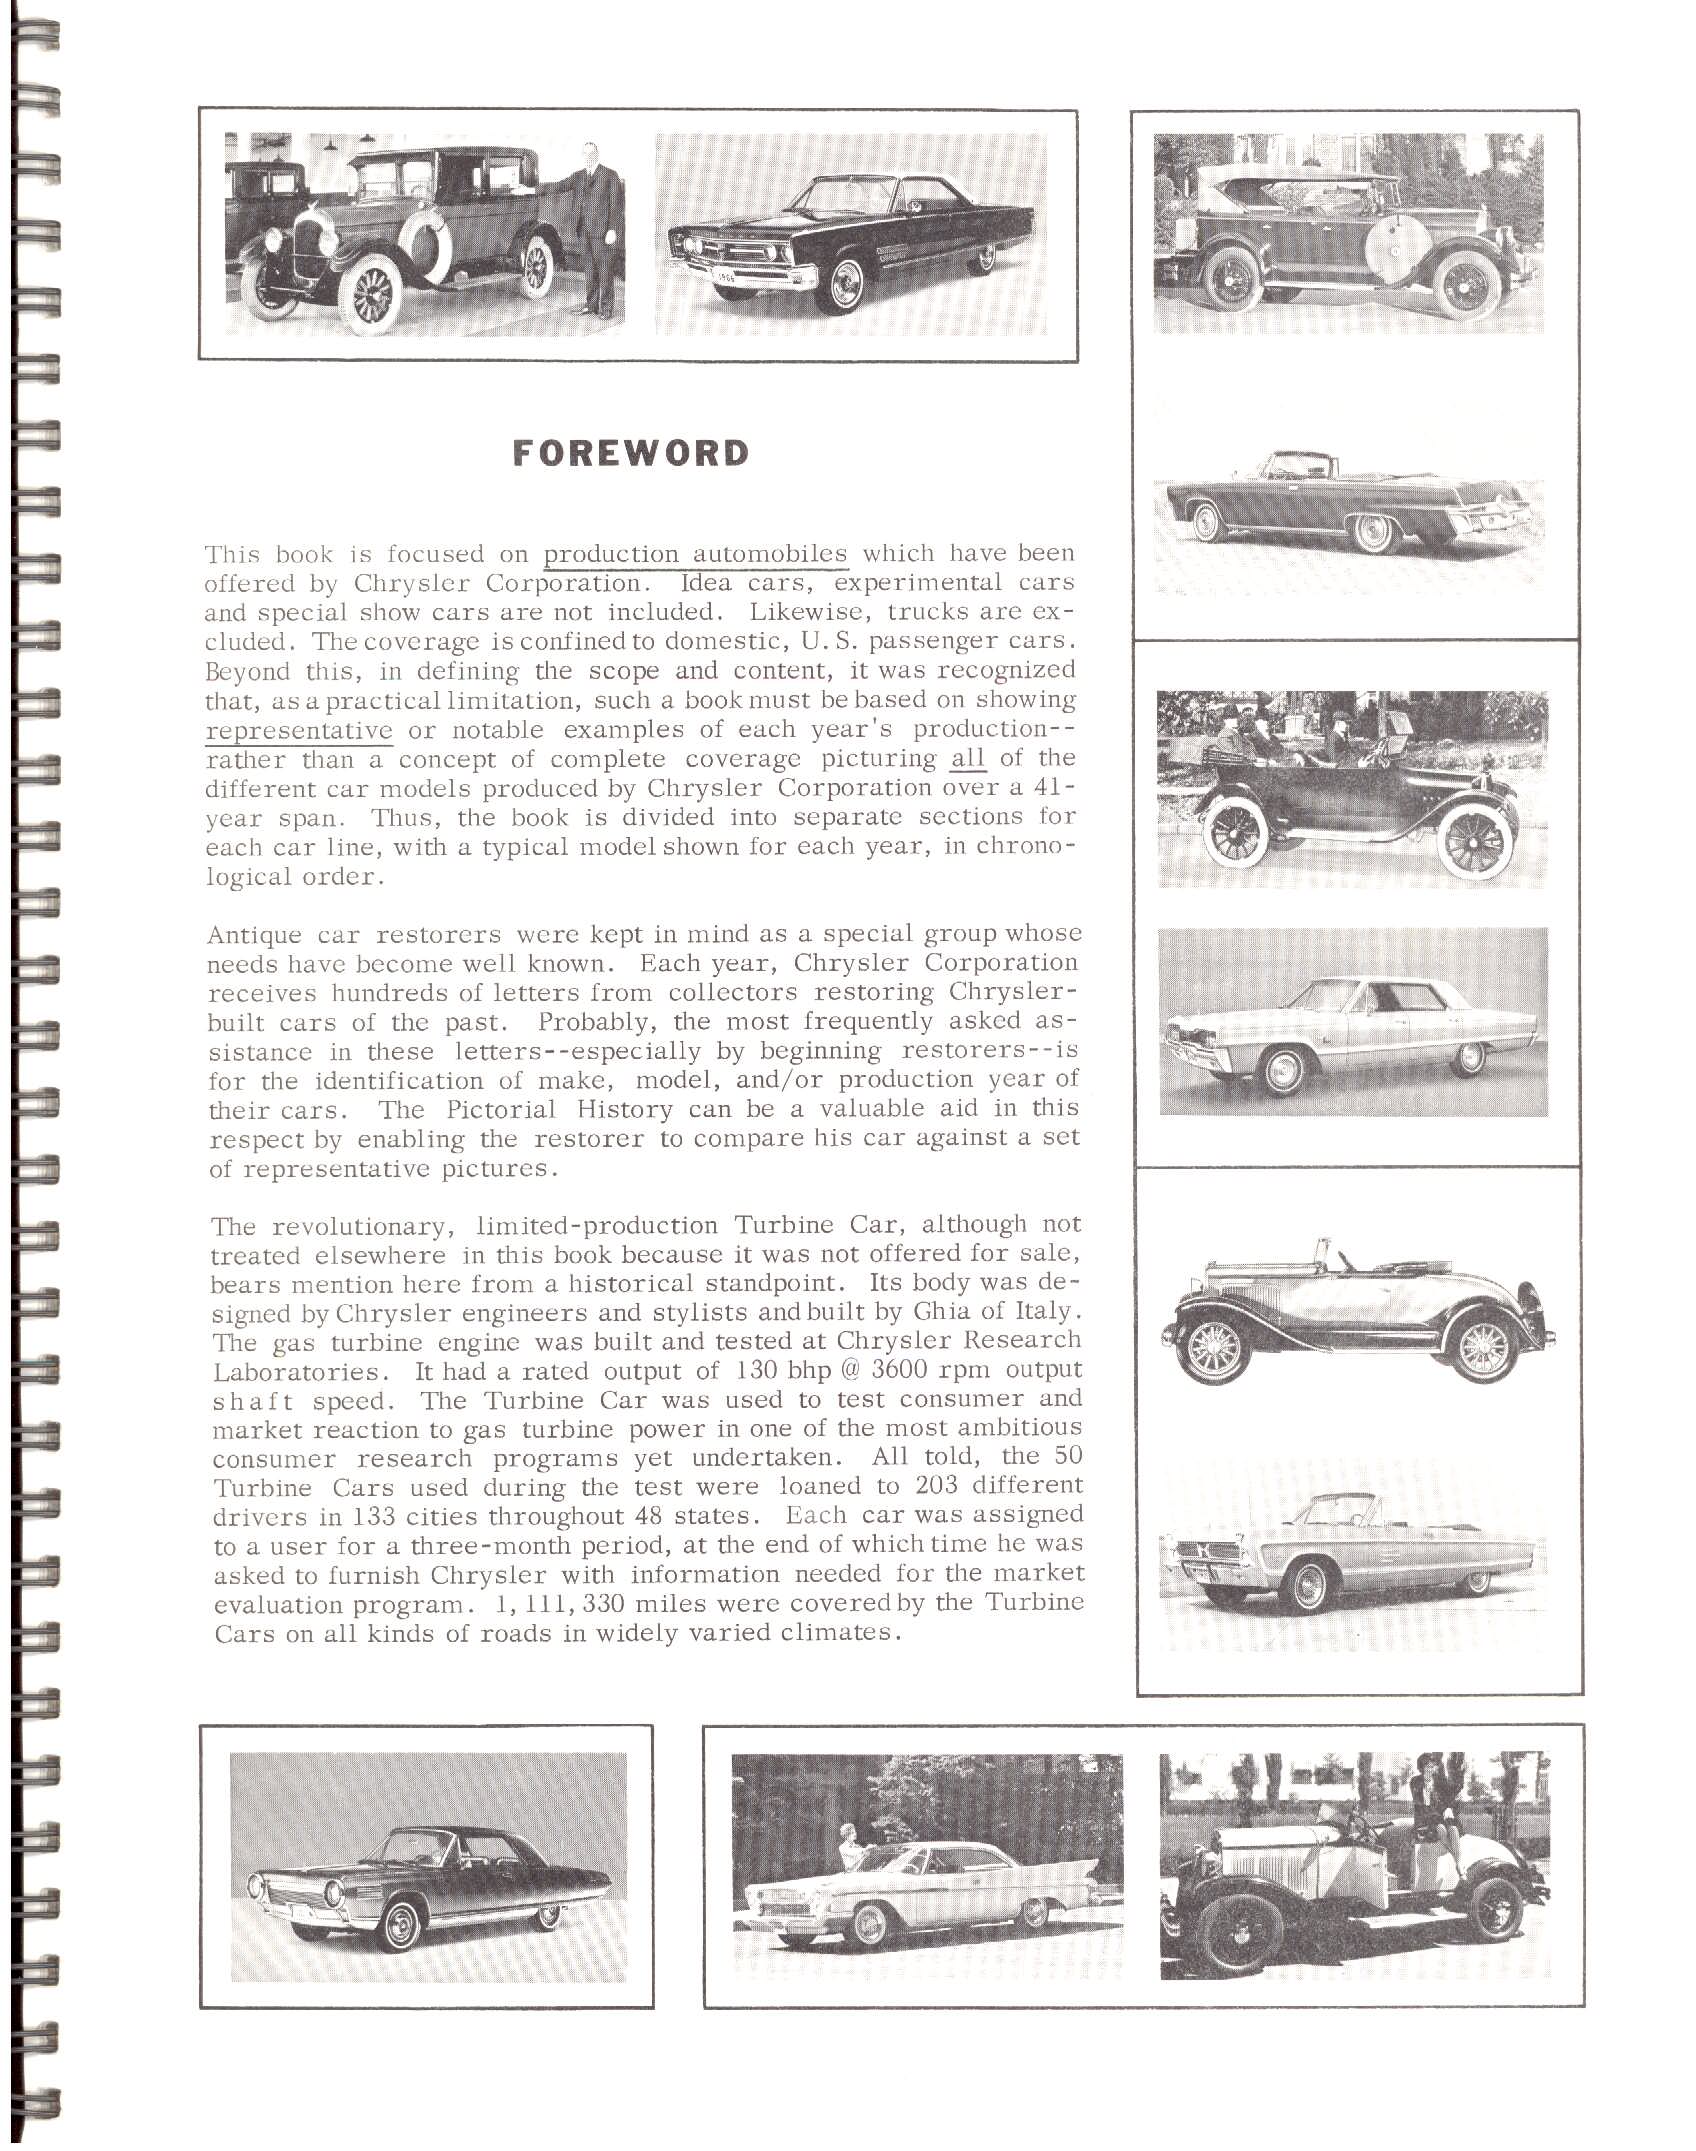 1966-History_Of_Chrysler_Cars-A02